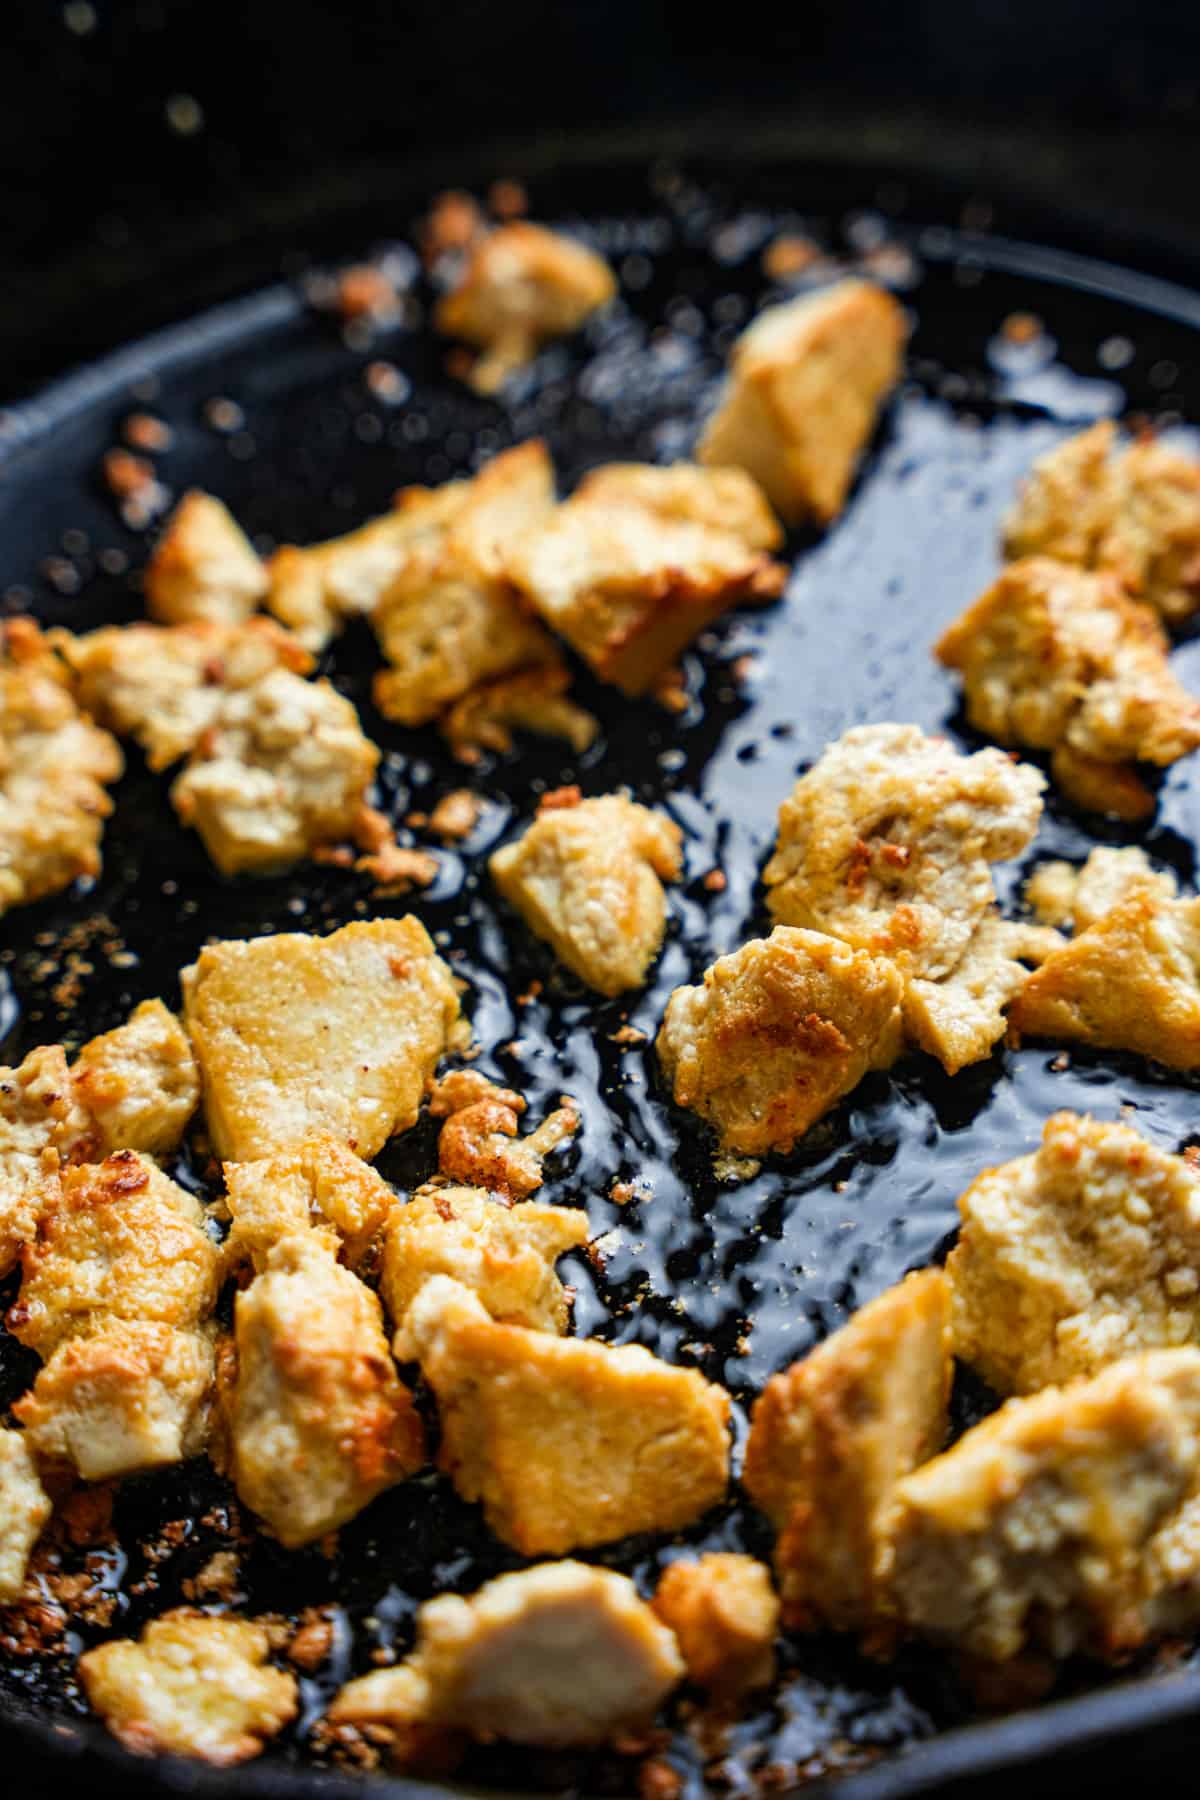 Torn pieces of tofu are pan-fried until golden brown in a cast iron skillet.